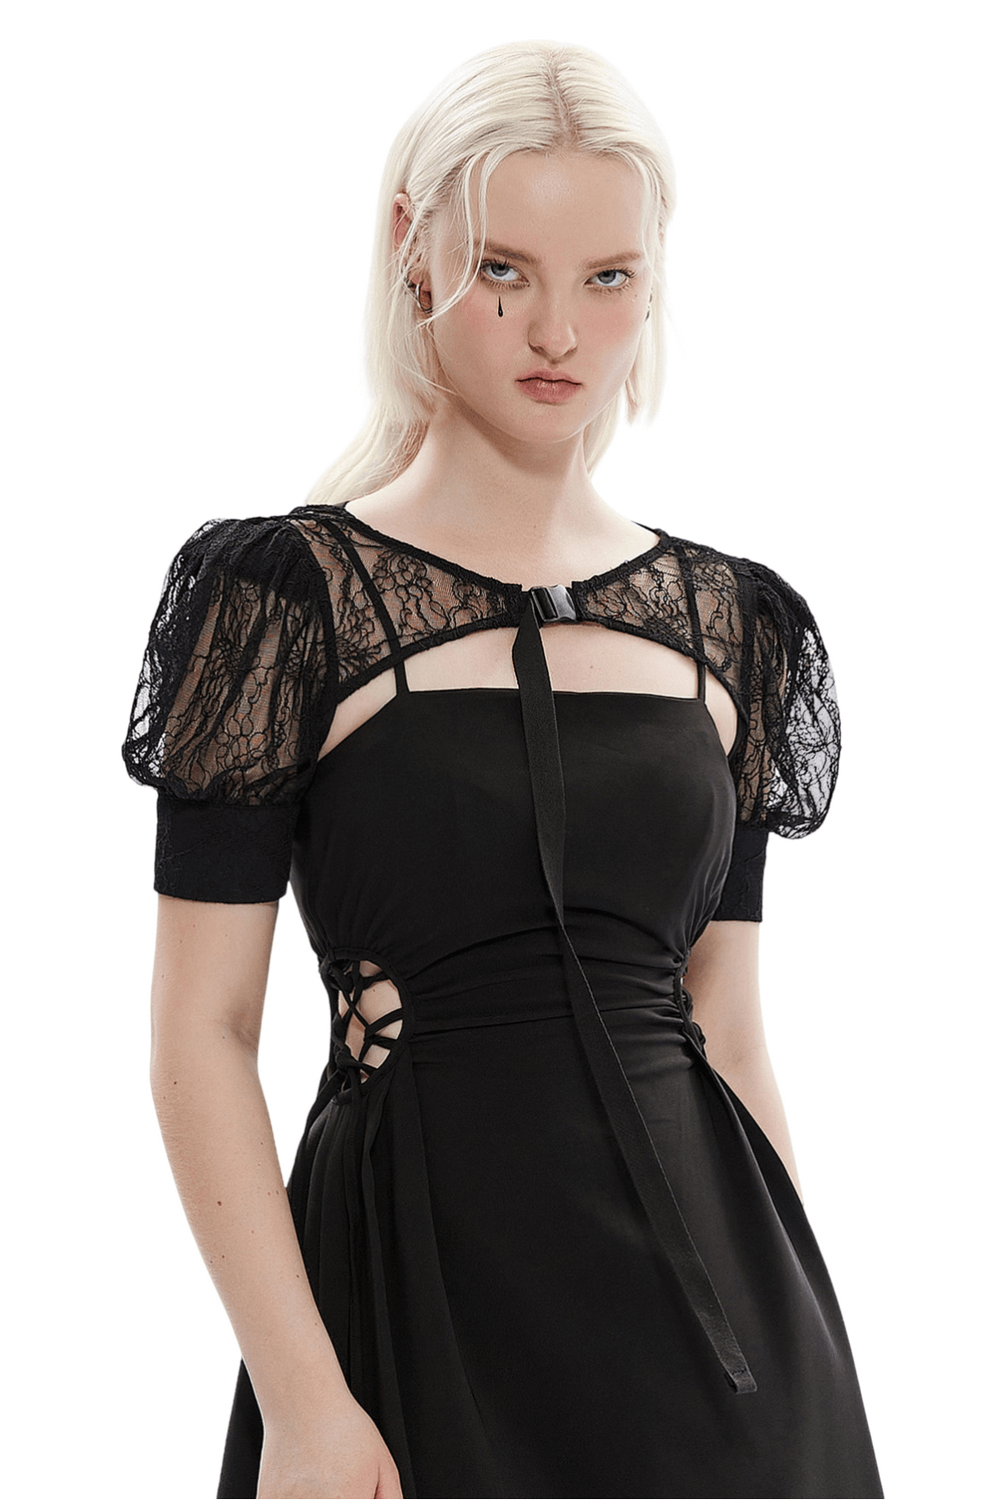 Elegant Black Lace Capelet with Princess Sleeves